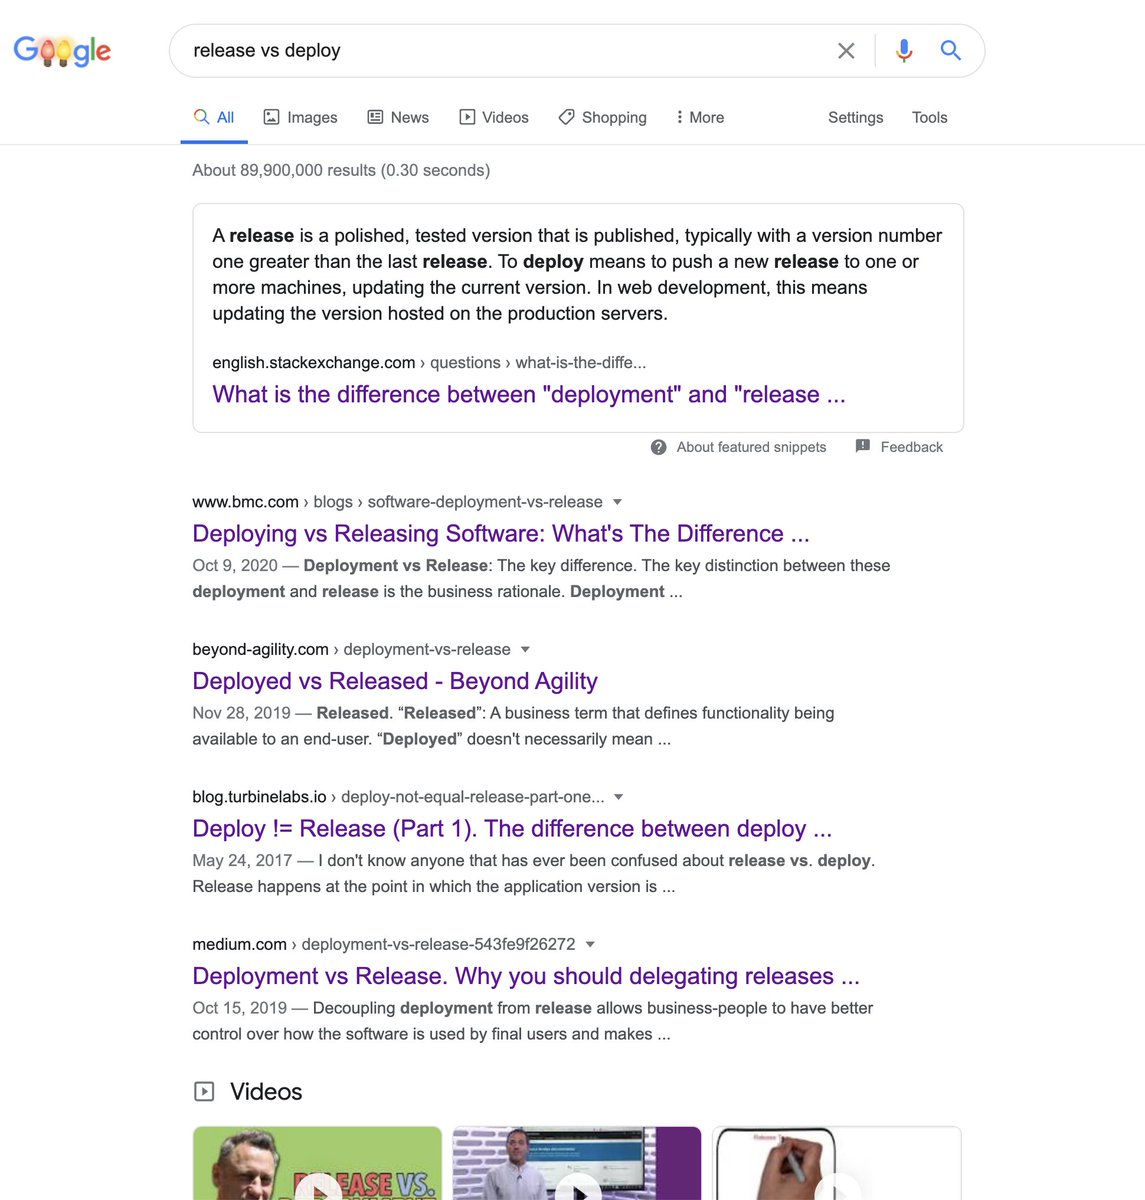 Here's the beginning of the first page of results on Google (that I get; you make have something different).TL;DR: Every result has its own definitions. The thing is a mess and we need an authoritative source to straighten that out.